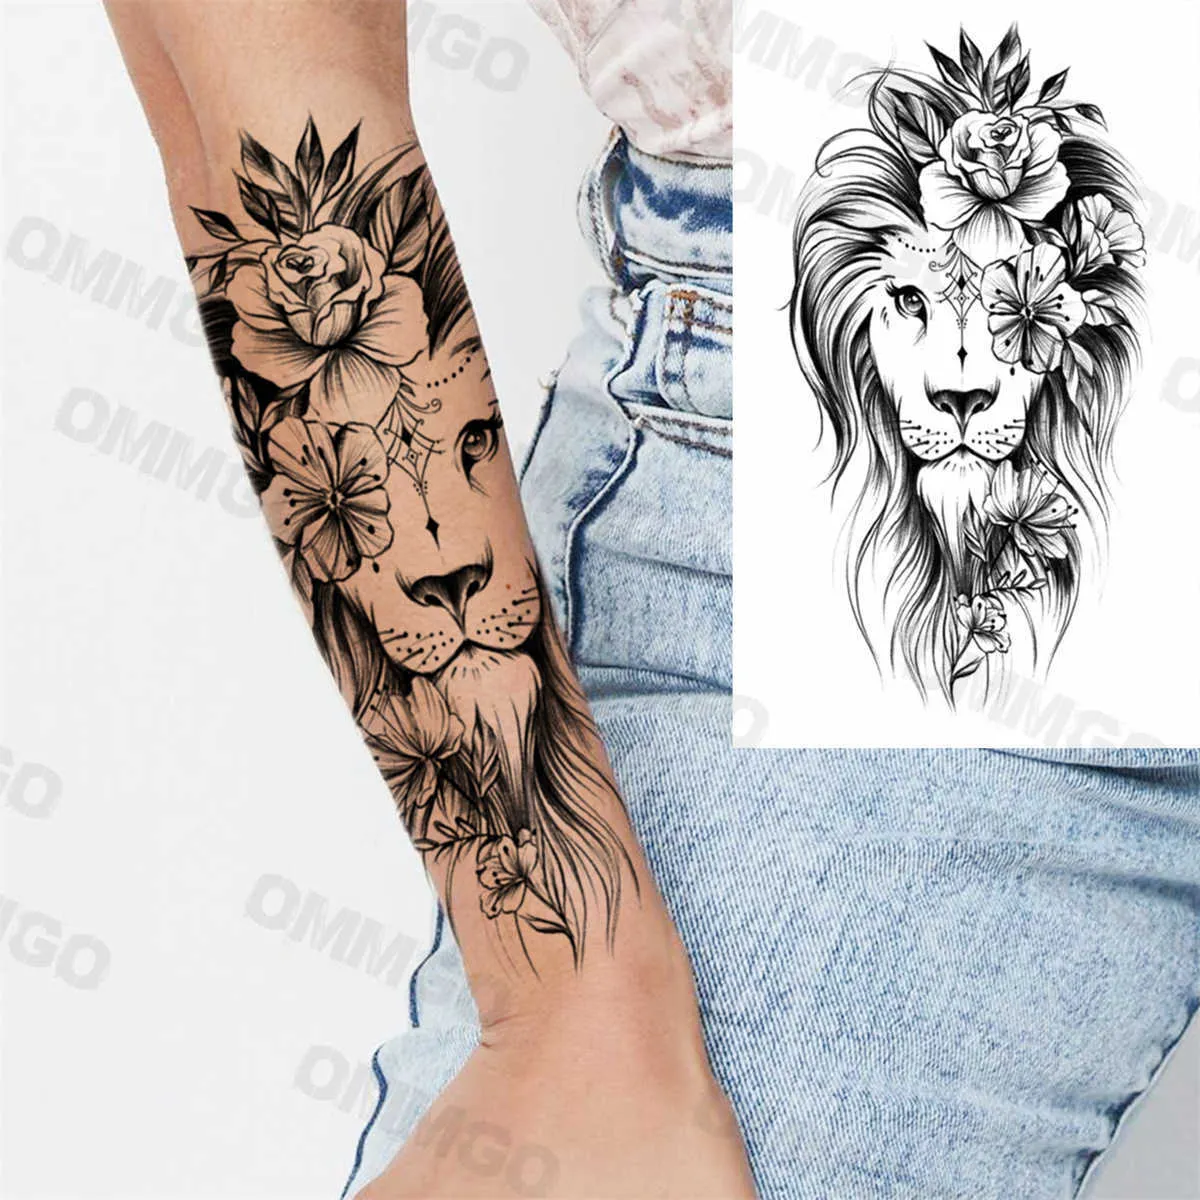 Arm Tattoo Ideas To Match Every Man's Style | FashionBeans